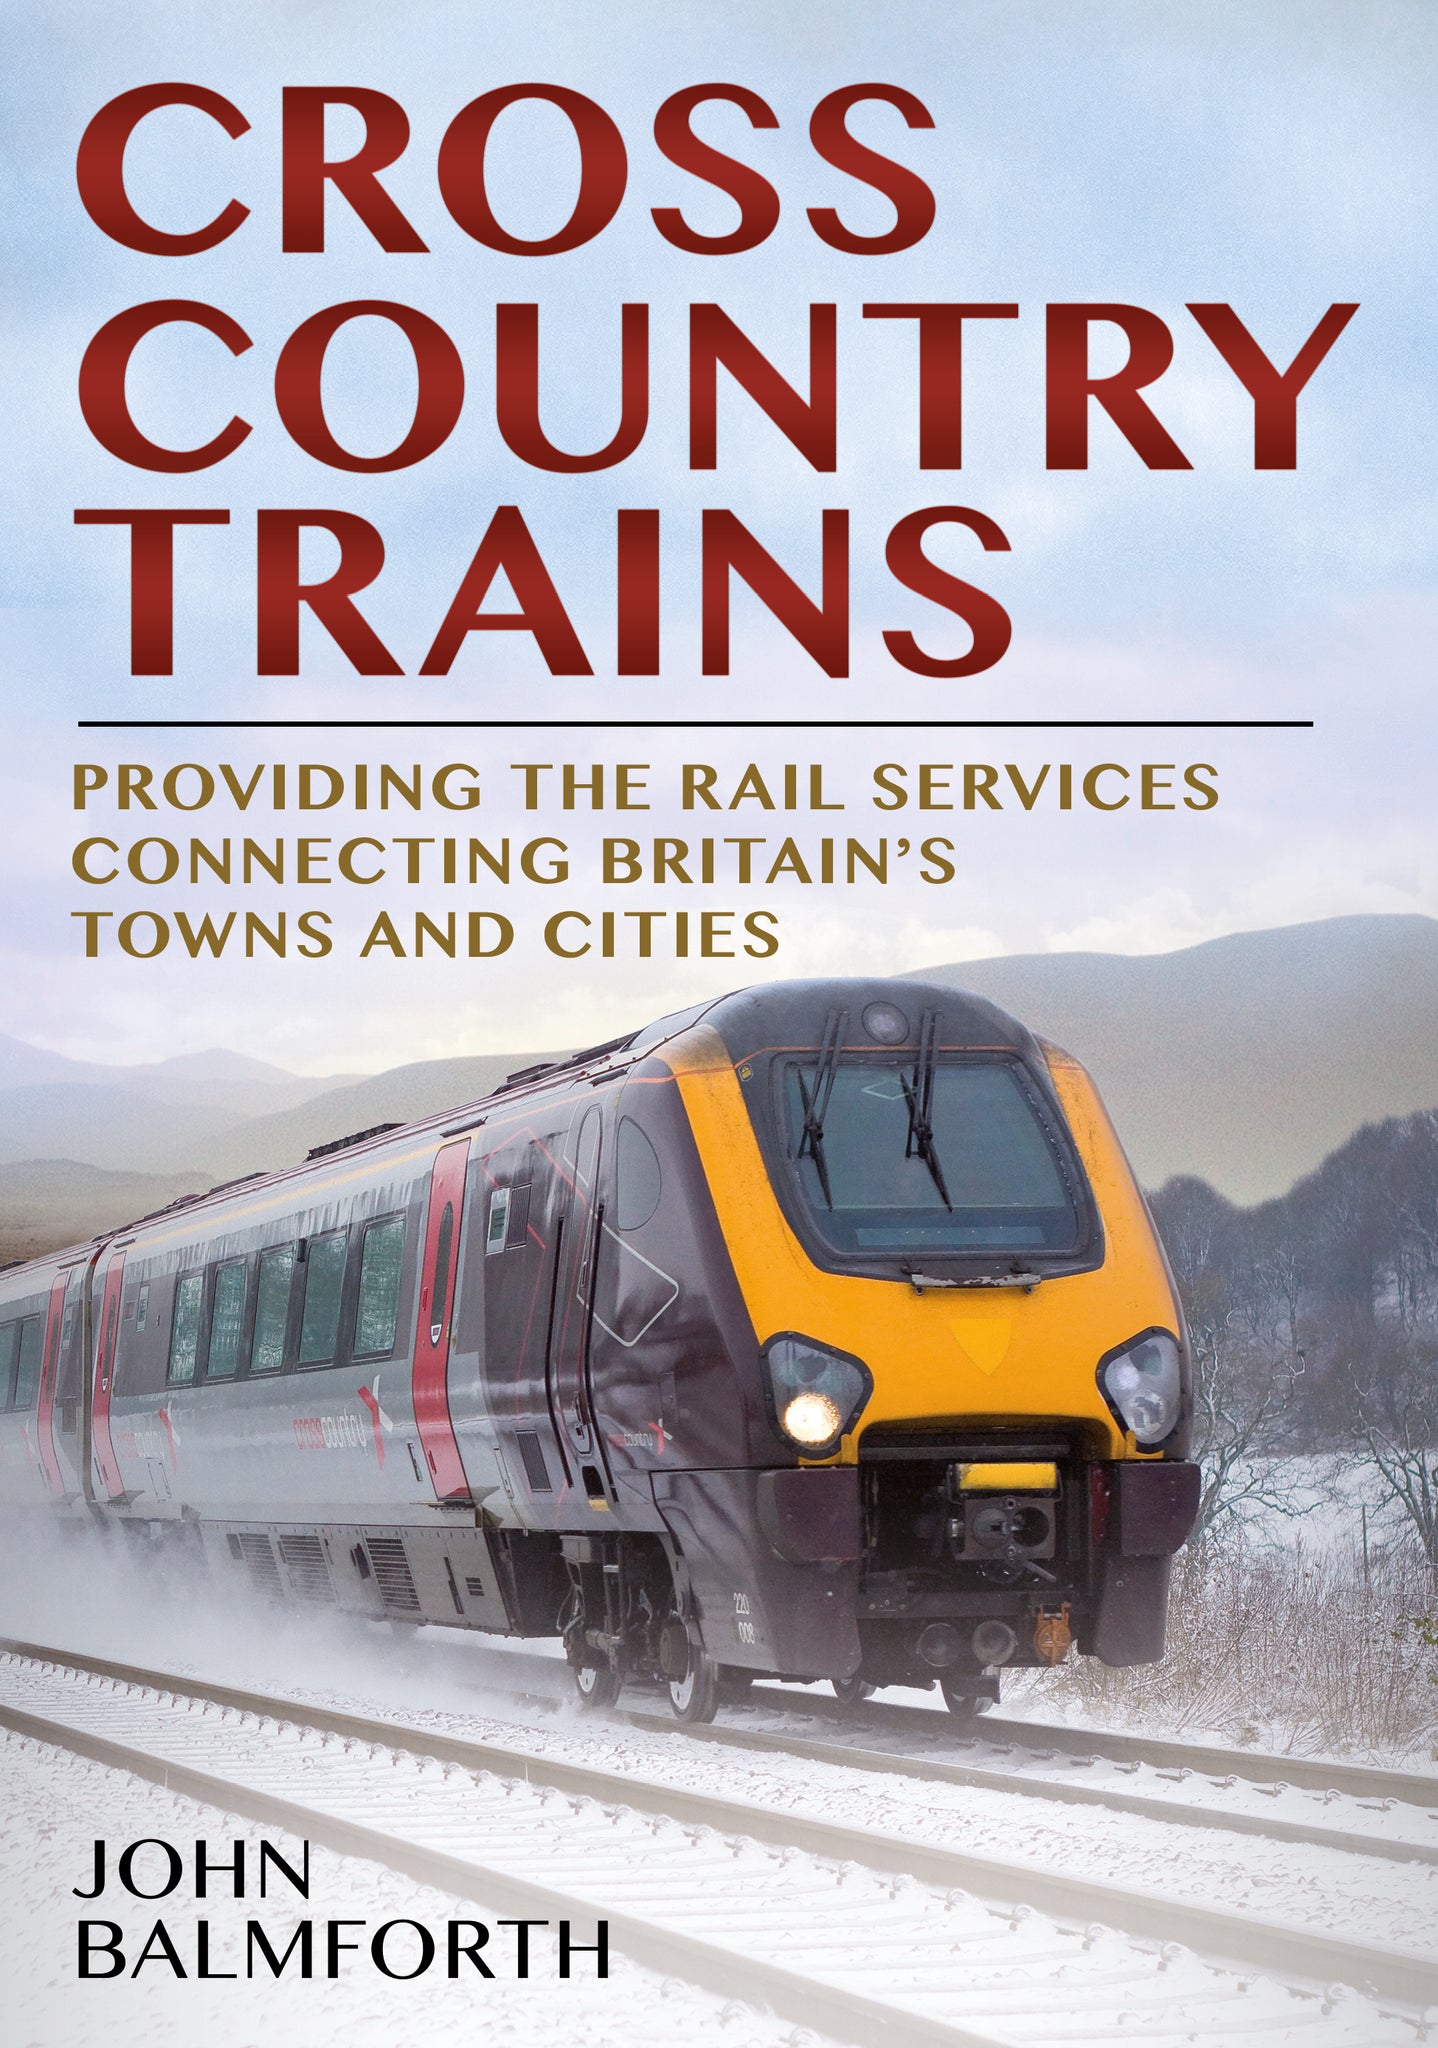 CrossCountry Trains - available now from Fonthill Media